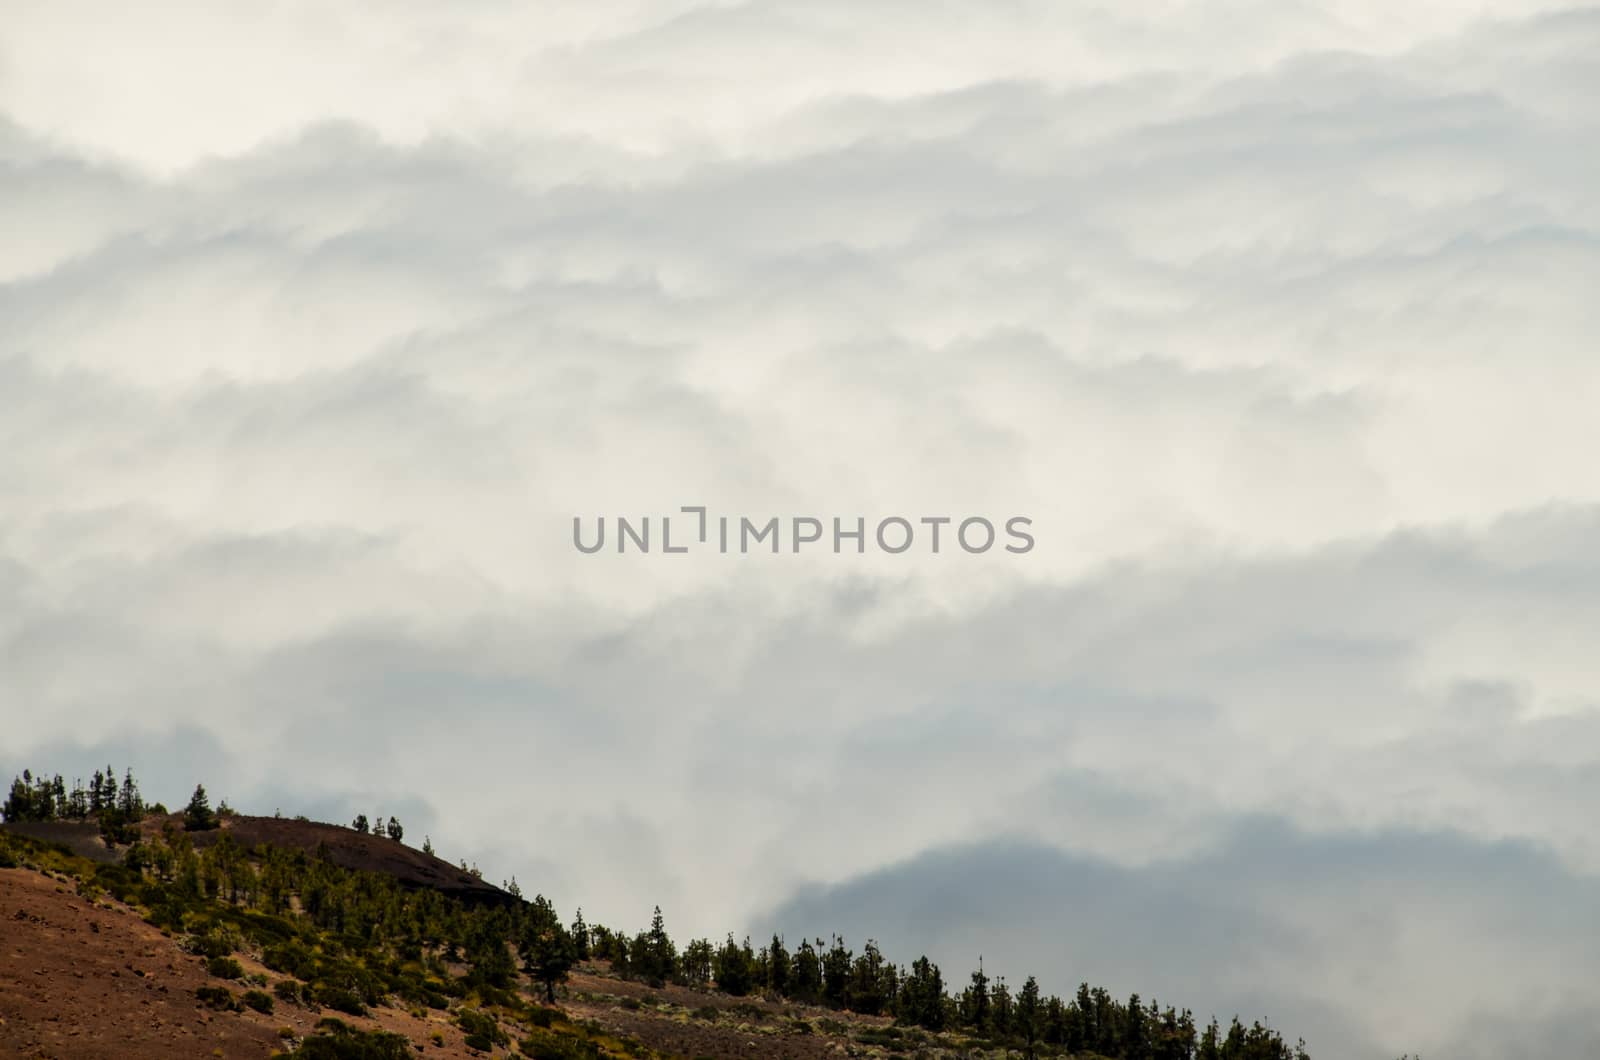 High Clouds over Pine Cone Trees Forest in Tenerife Island